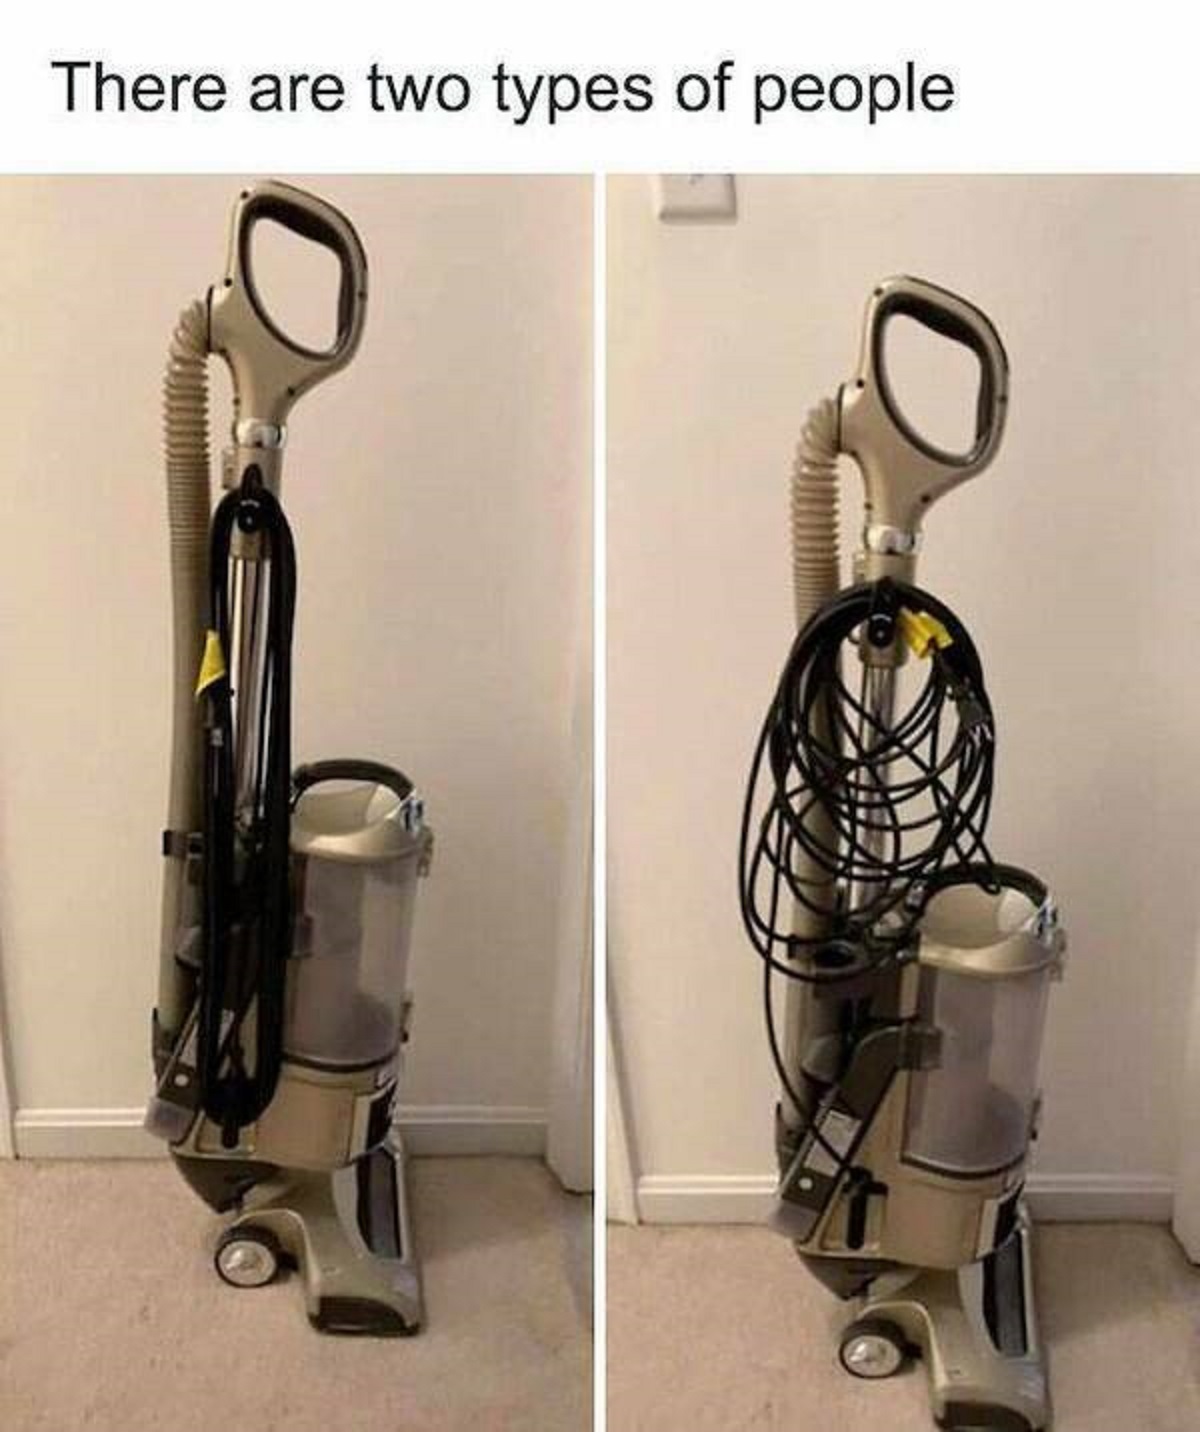 there are two types of people vacuum - There are two types of people